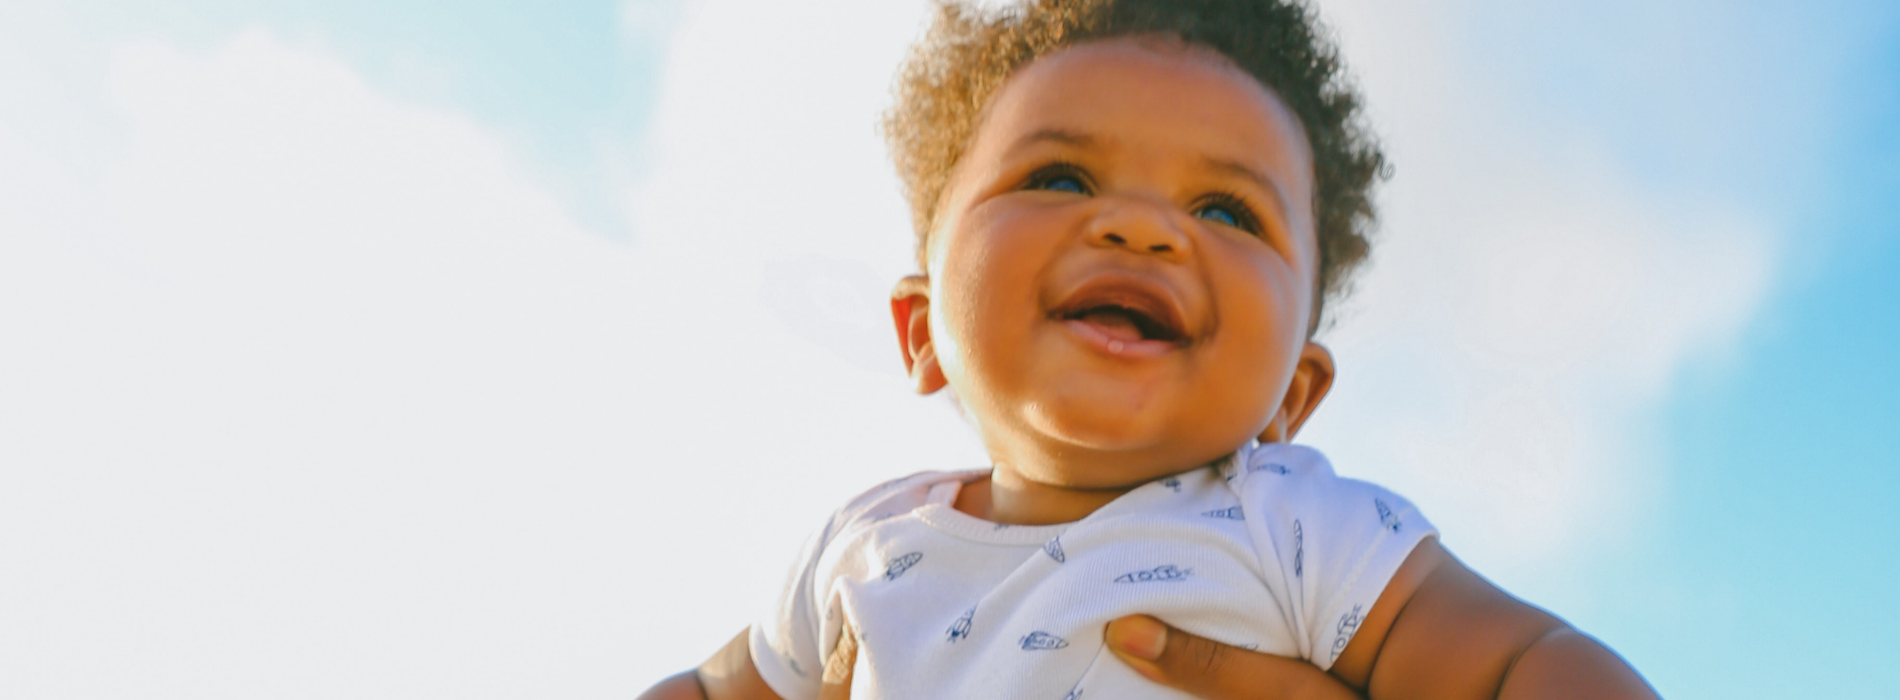 A baby is held up against the blue sky.